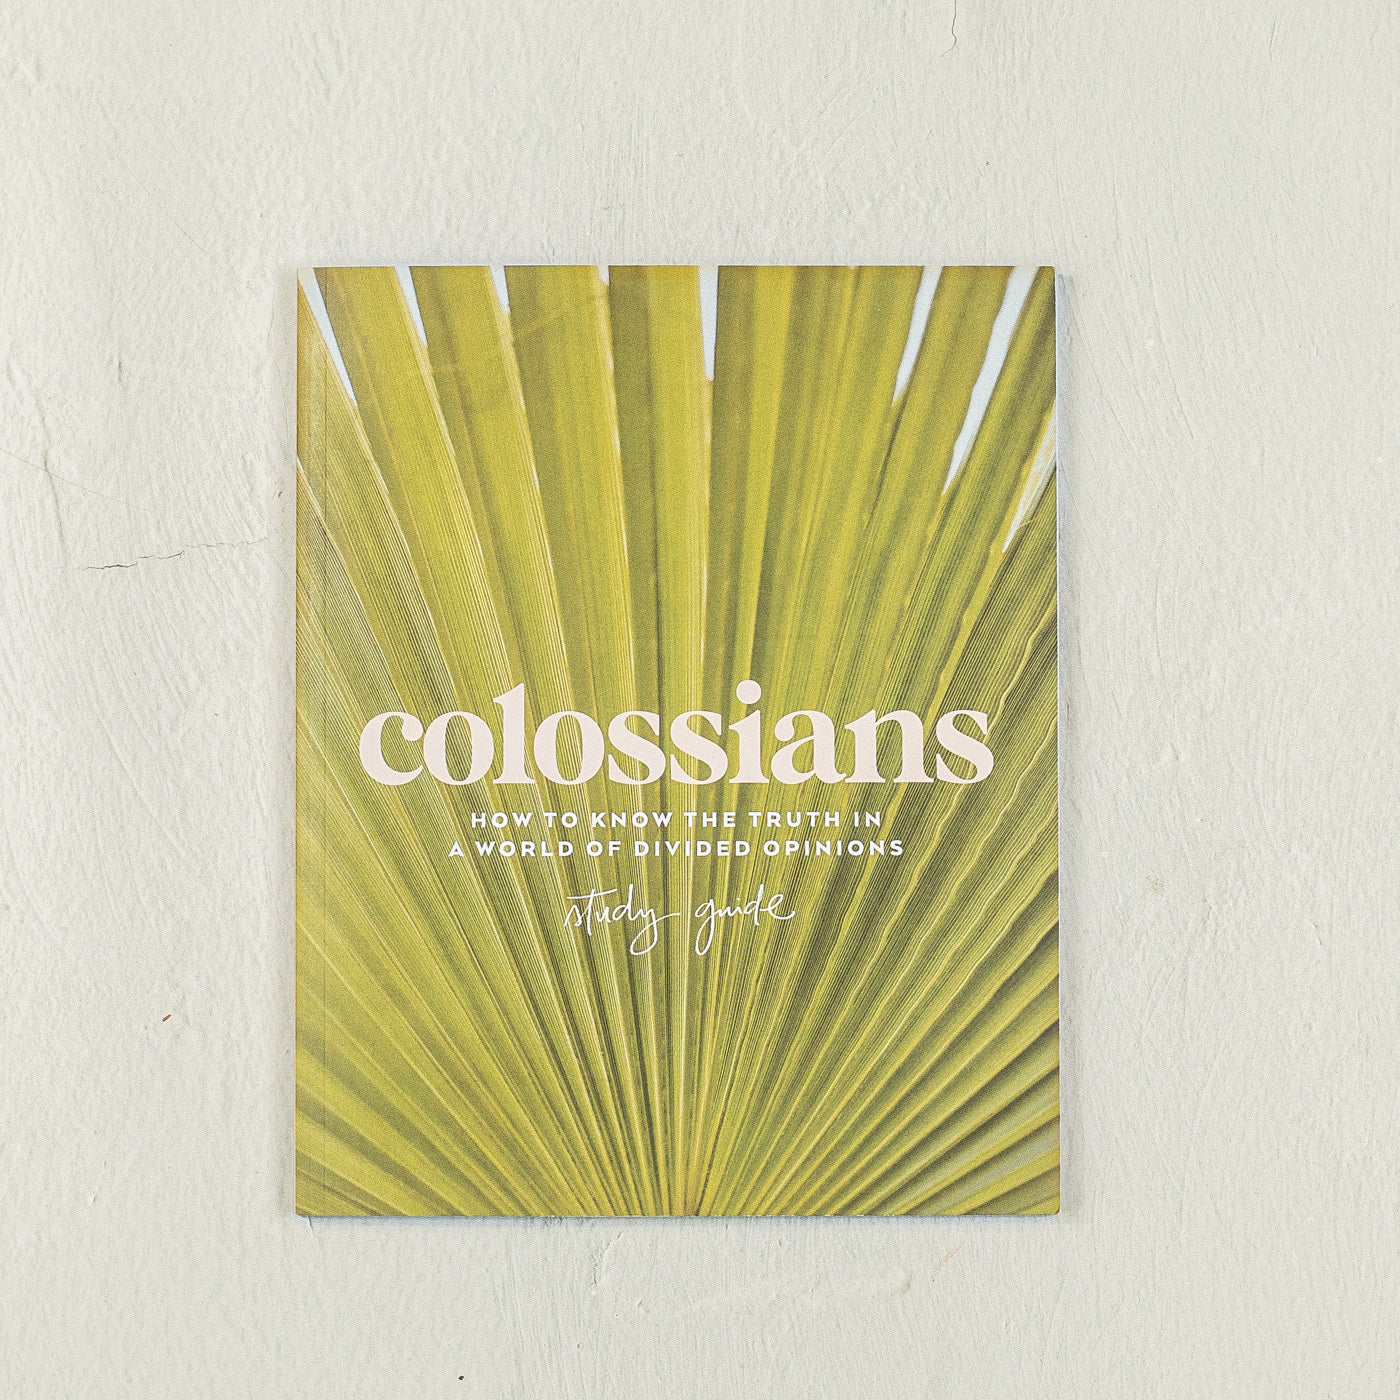 Colossians: How to Know the Truth in a World of Divided Opinions